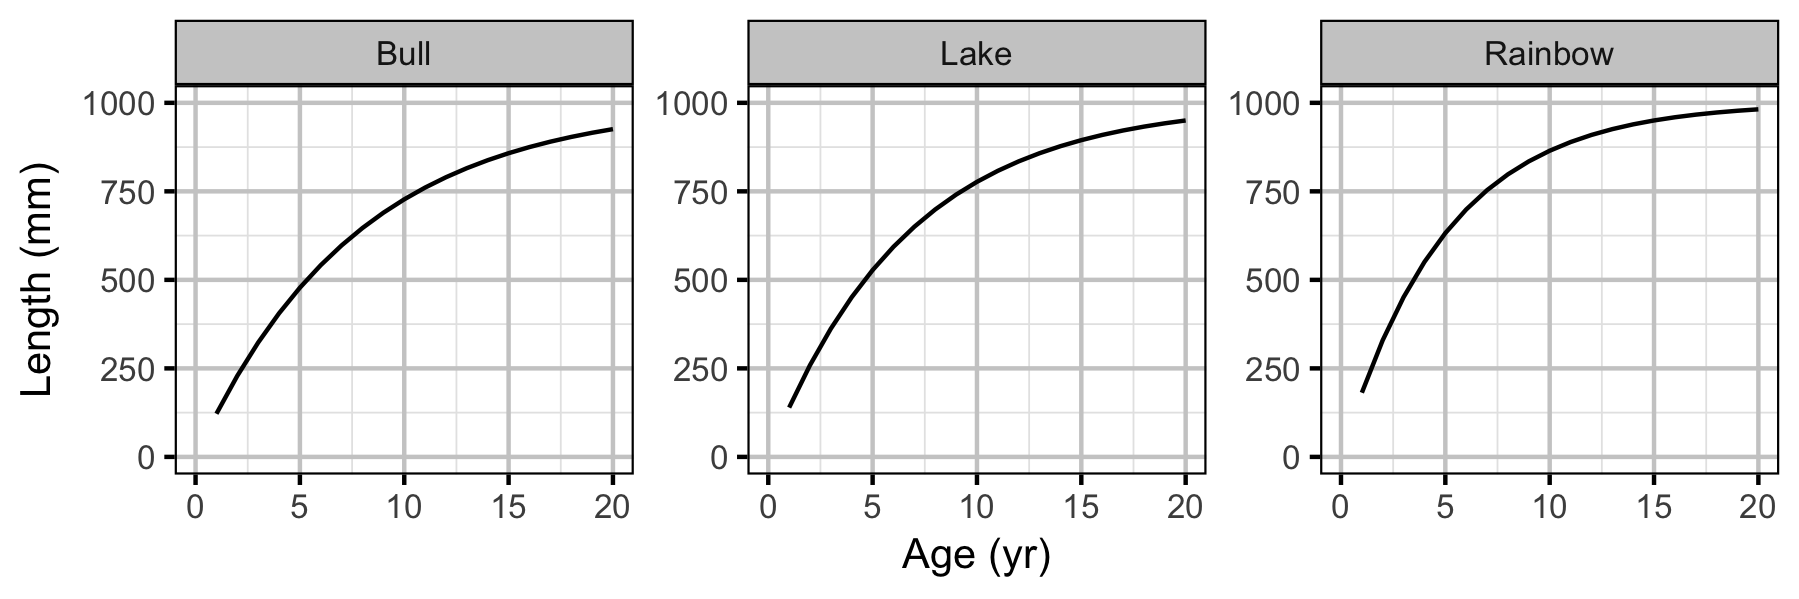 figures/yield/length_age.png